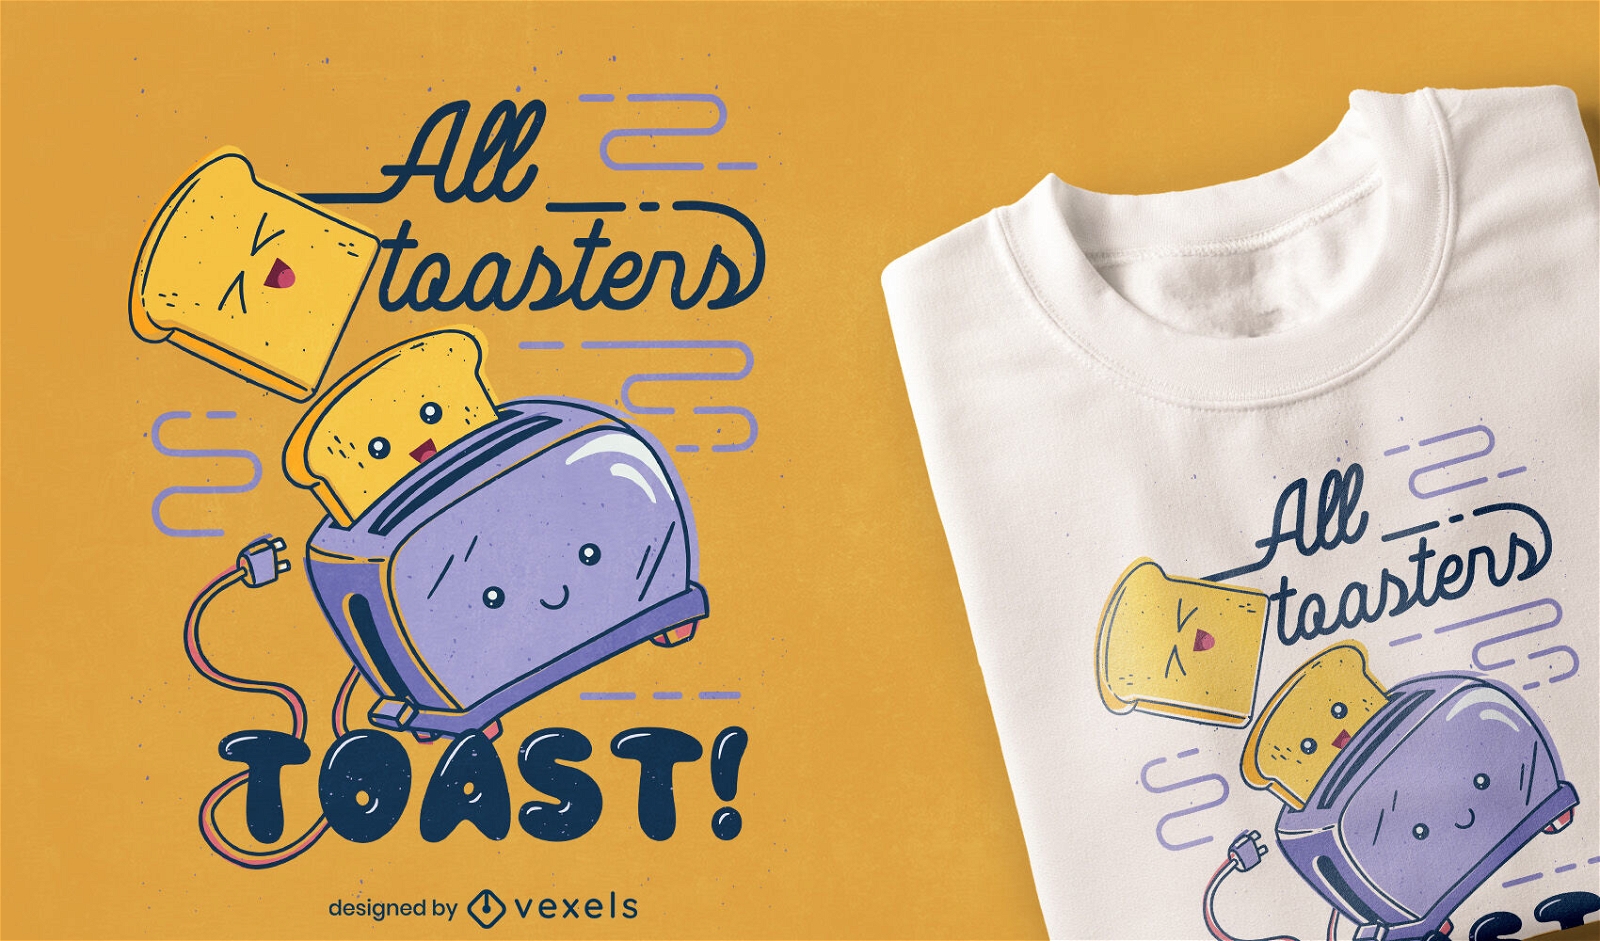 All toasters toast t-shirt design